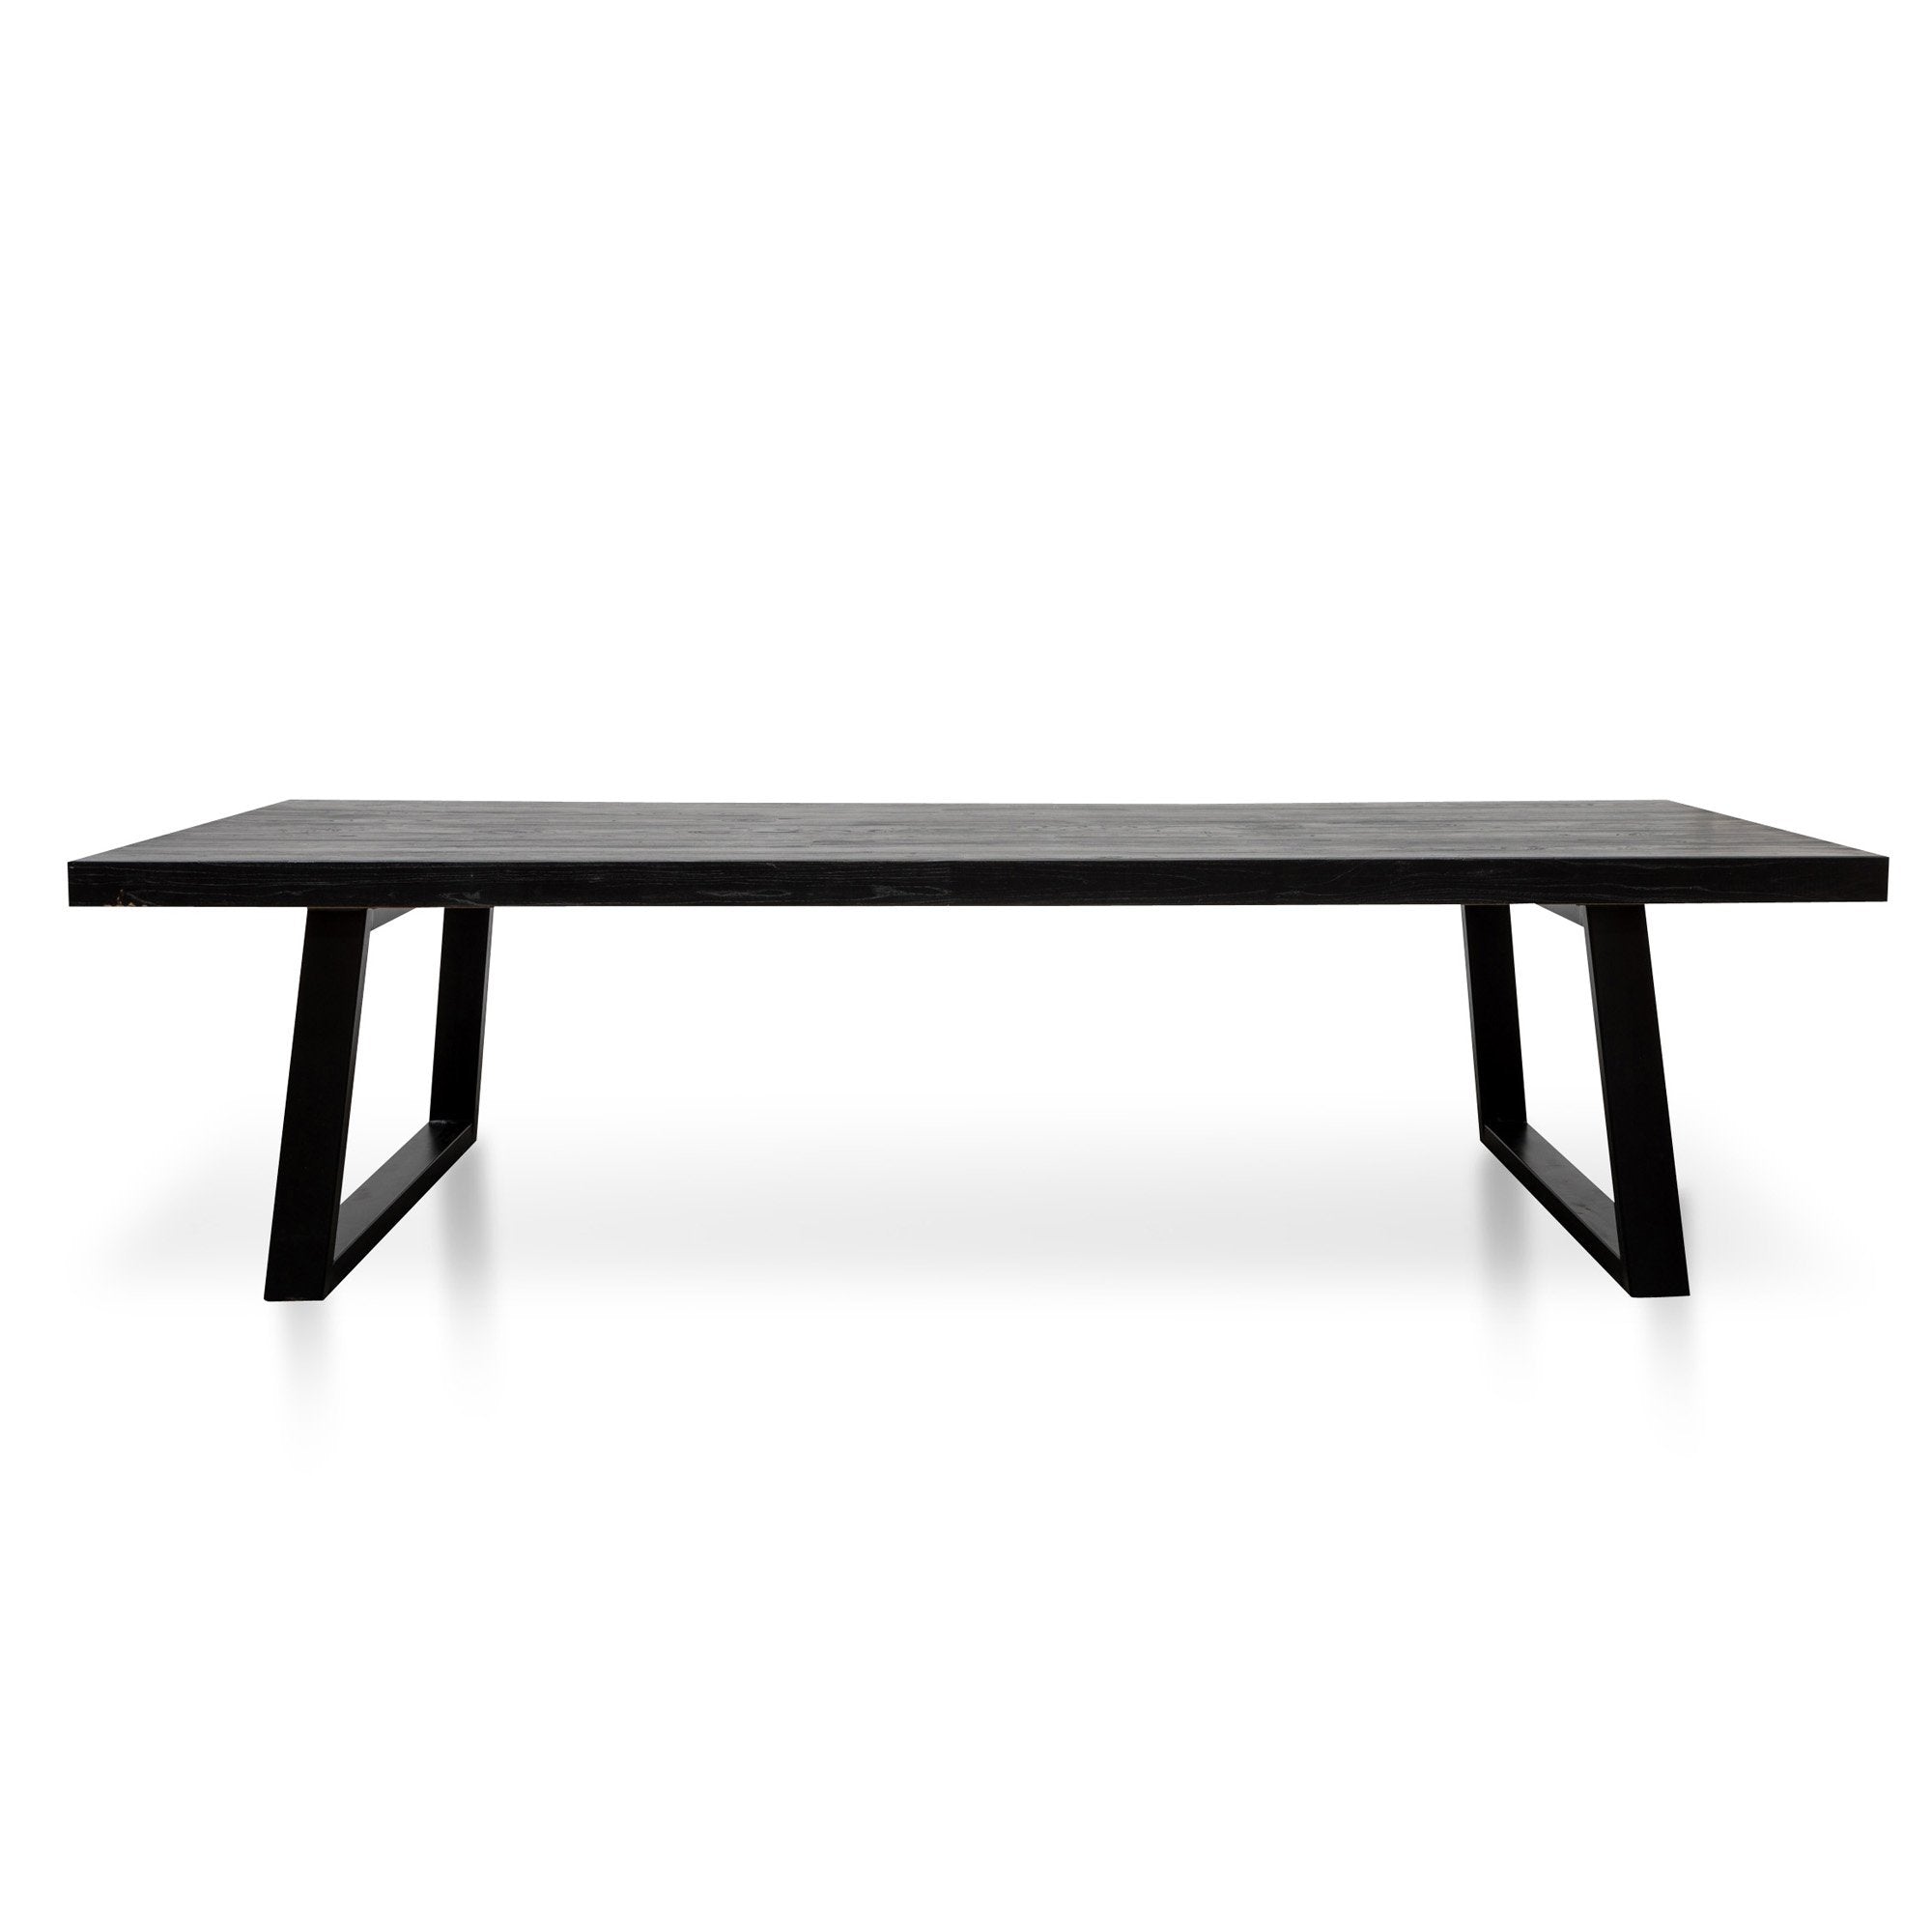 Eros 3m Reclaimed Wood Dining Table - Full Black - Dining Tables